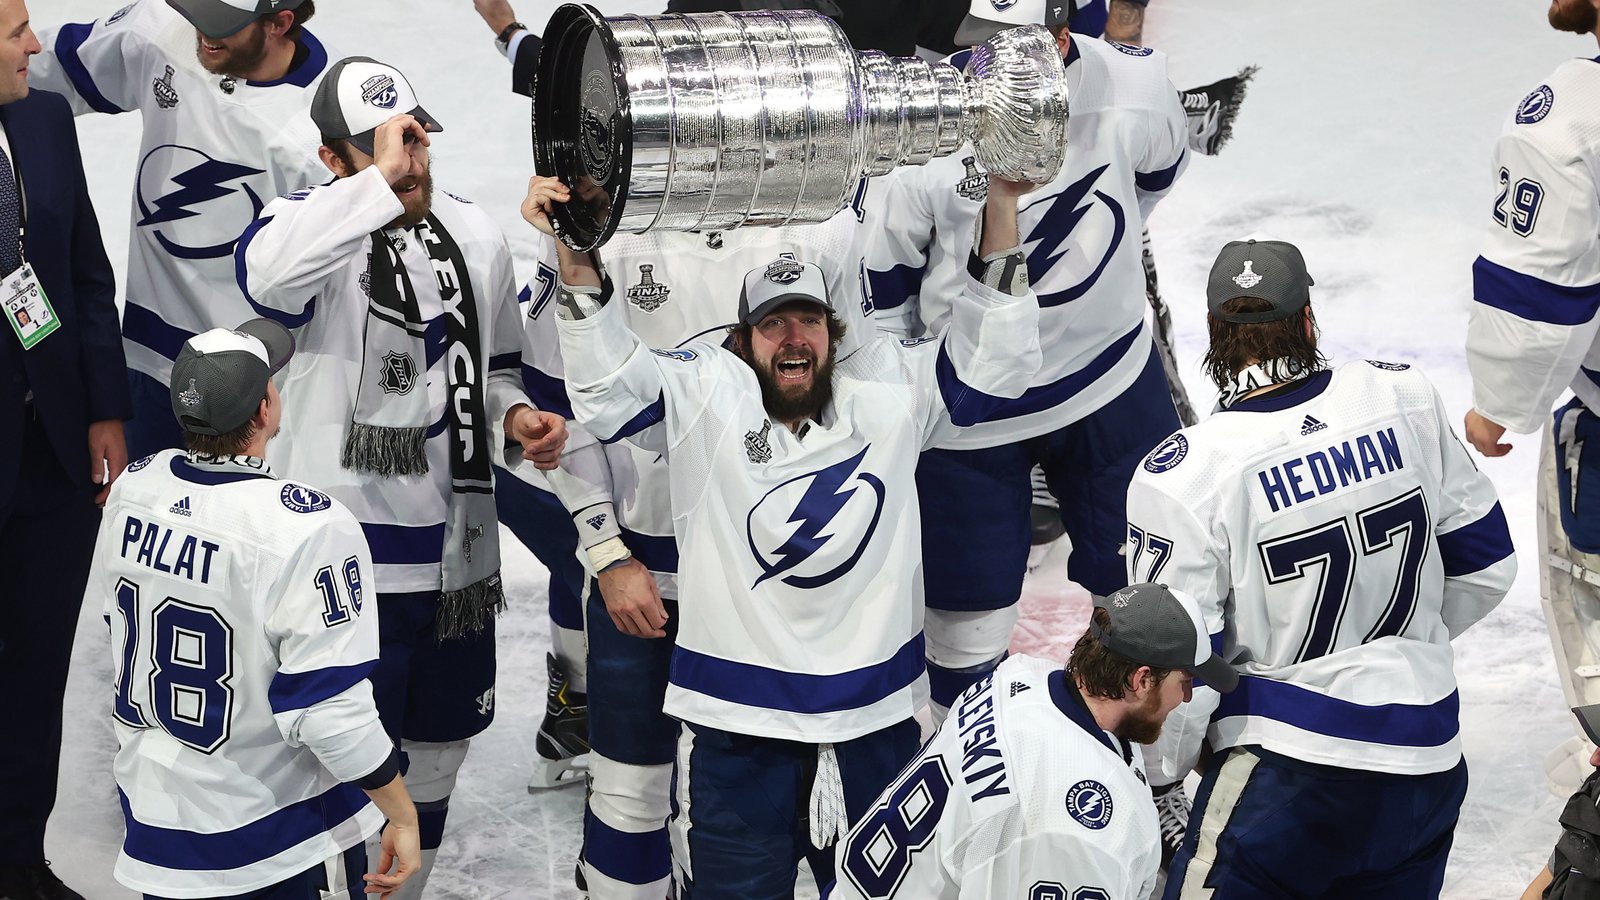 Lightning’s GM started shopping players after winning the Cup!